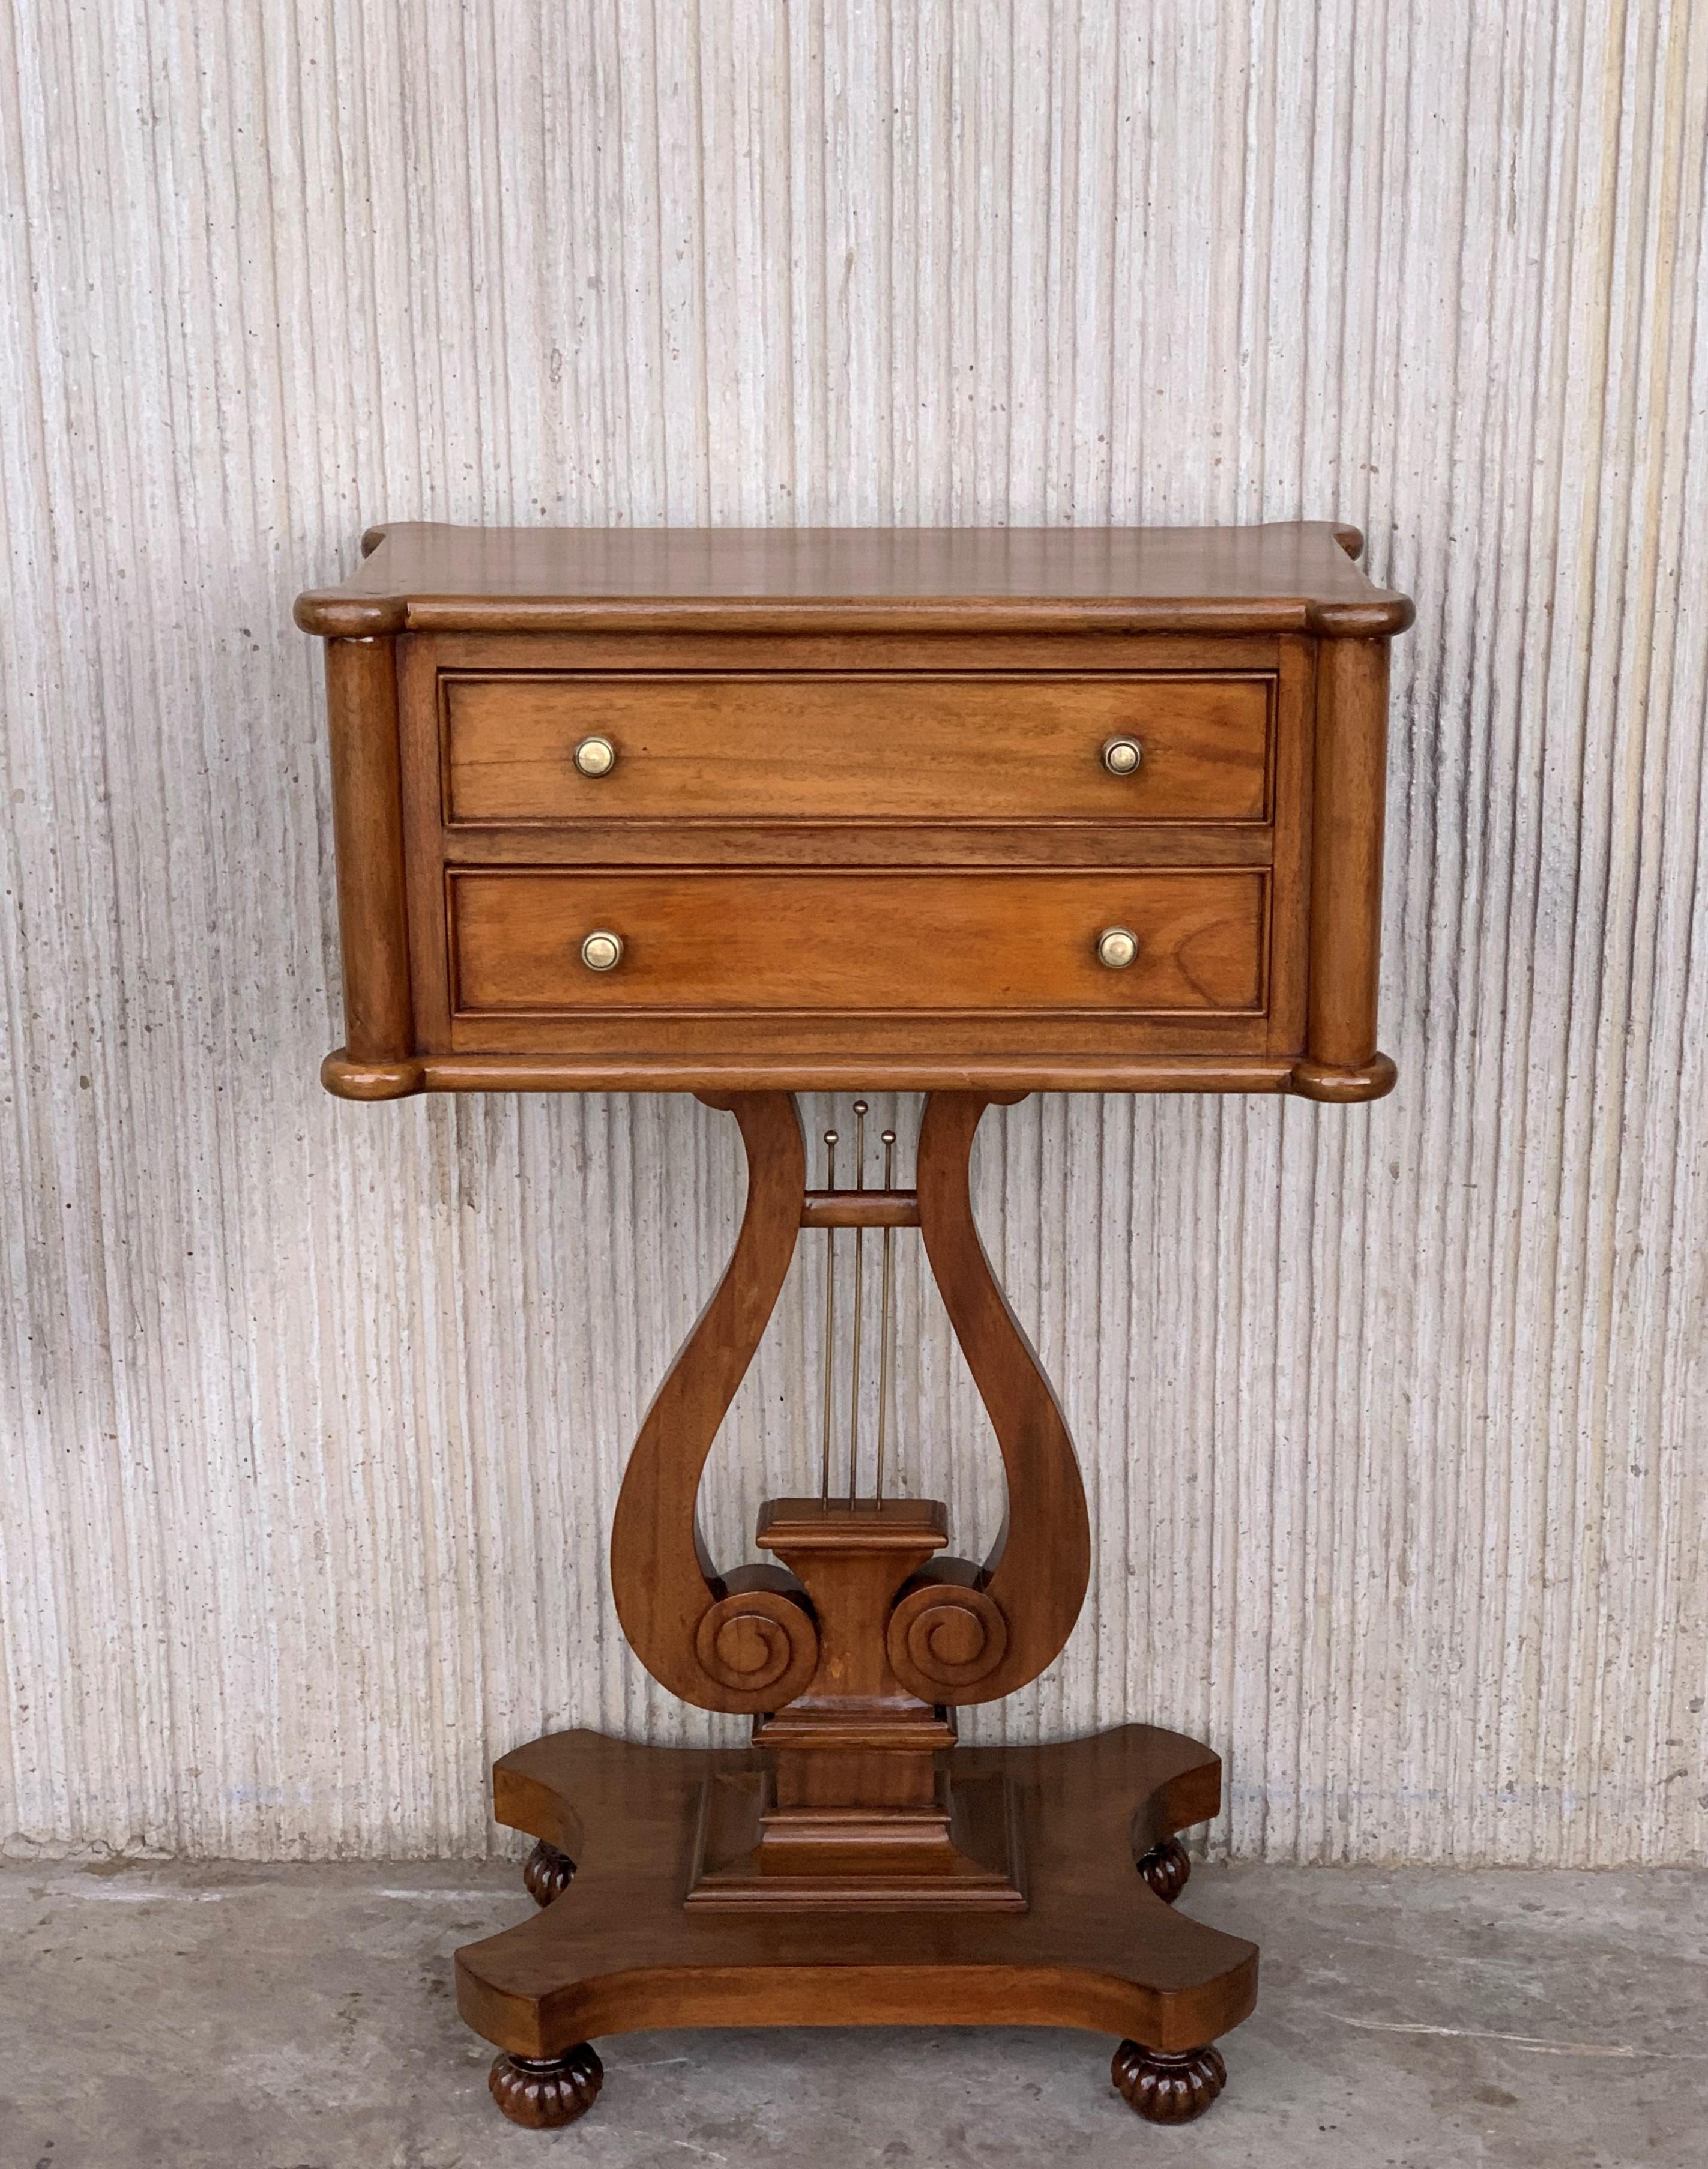 A smart and top quality antique side table in walnut, is made in the antique Regency style, they date from circa 1930s-1950s.

The top have beautiful form on solid wood, with crossbanded edges. They sit on two drawers and lovely harp shaped leg